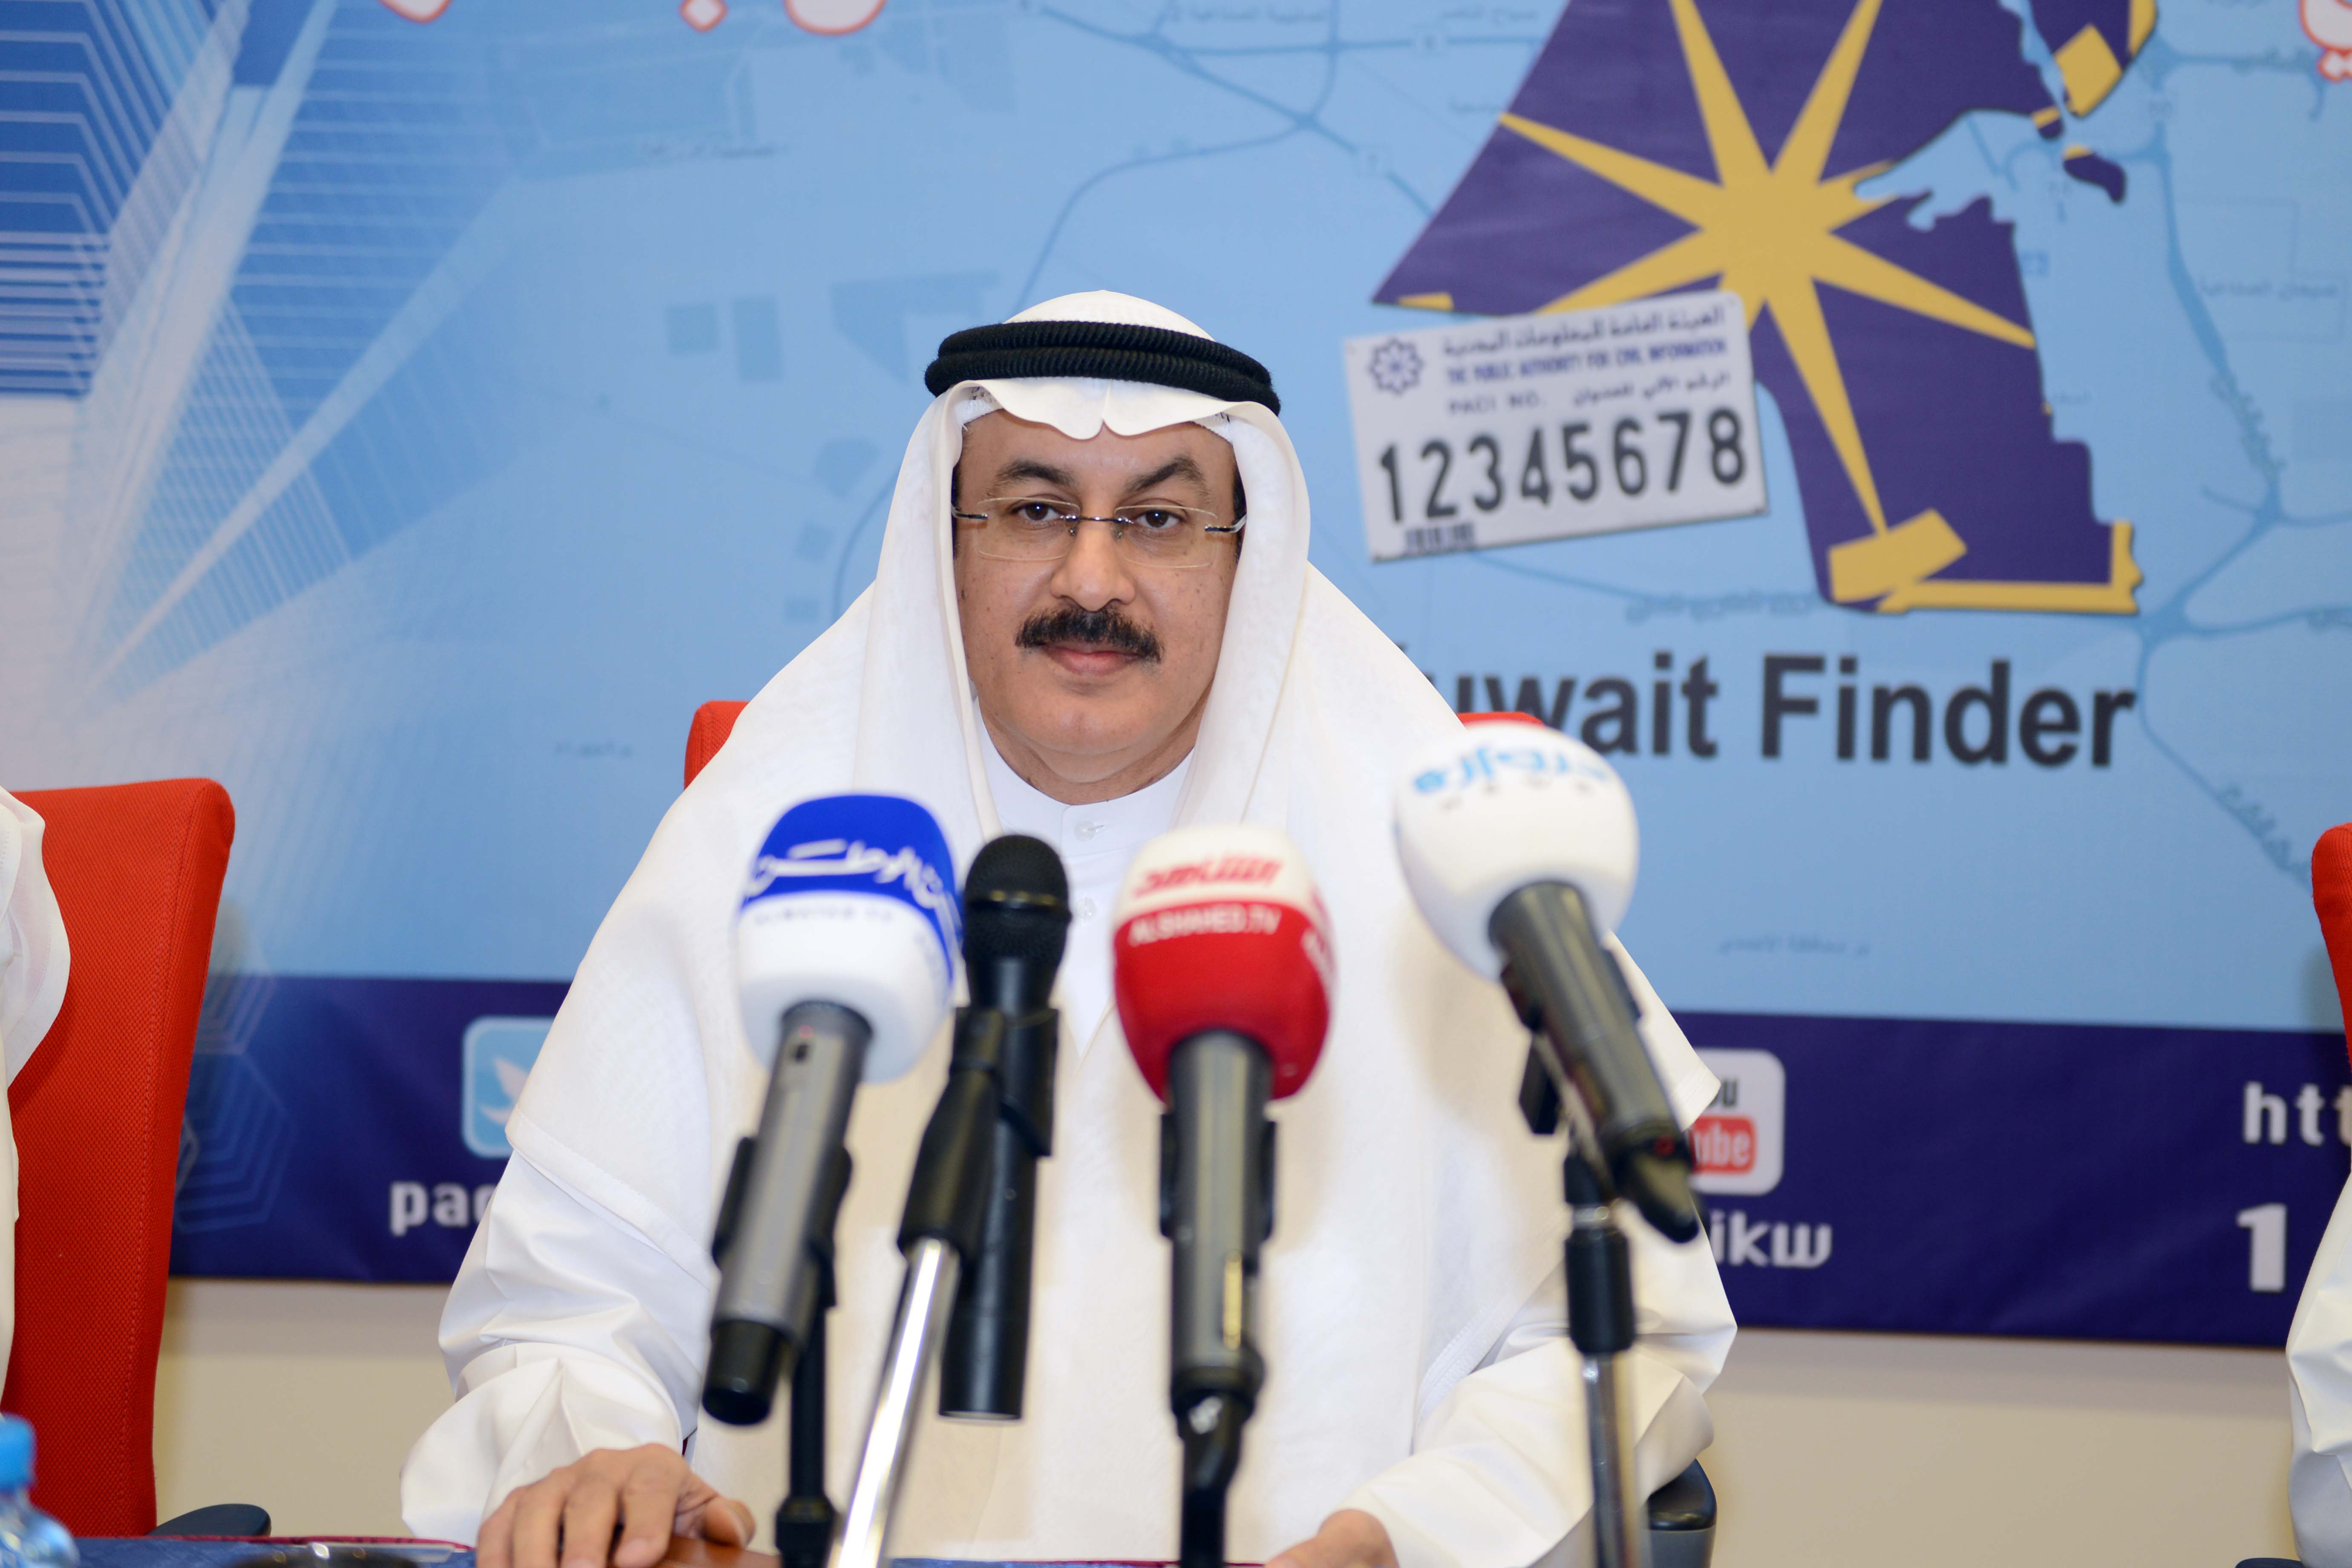 Director General of the Kuwait's Public Authority for Civil Information Musaed Al-Asousi